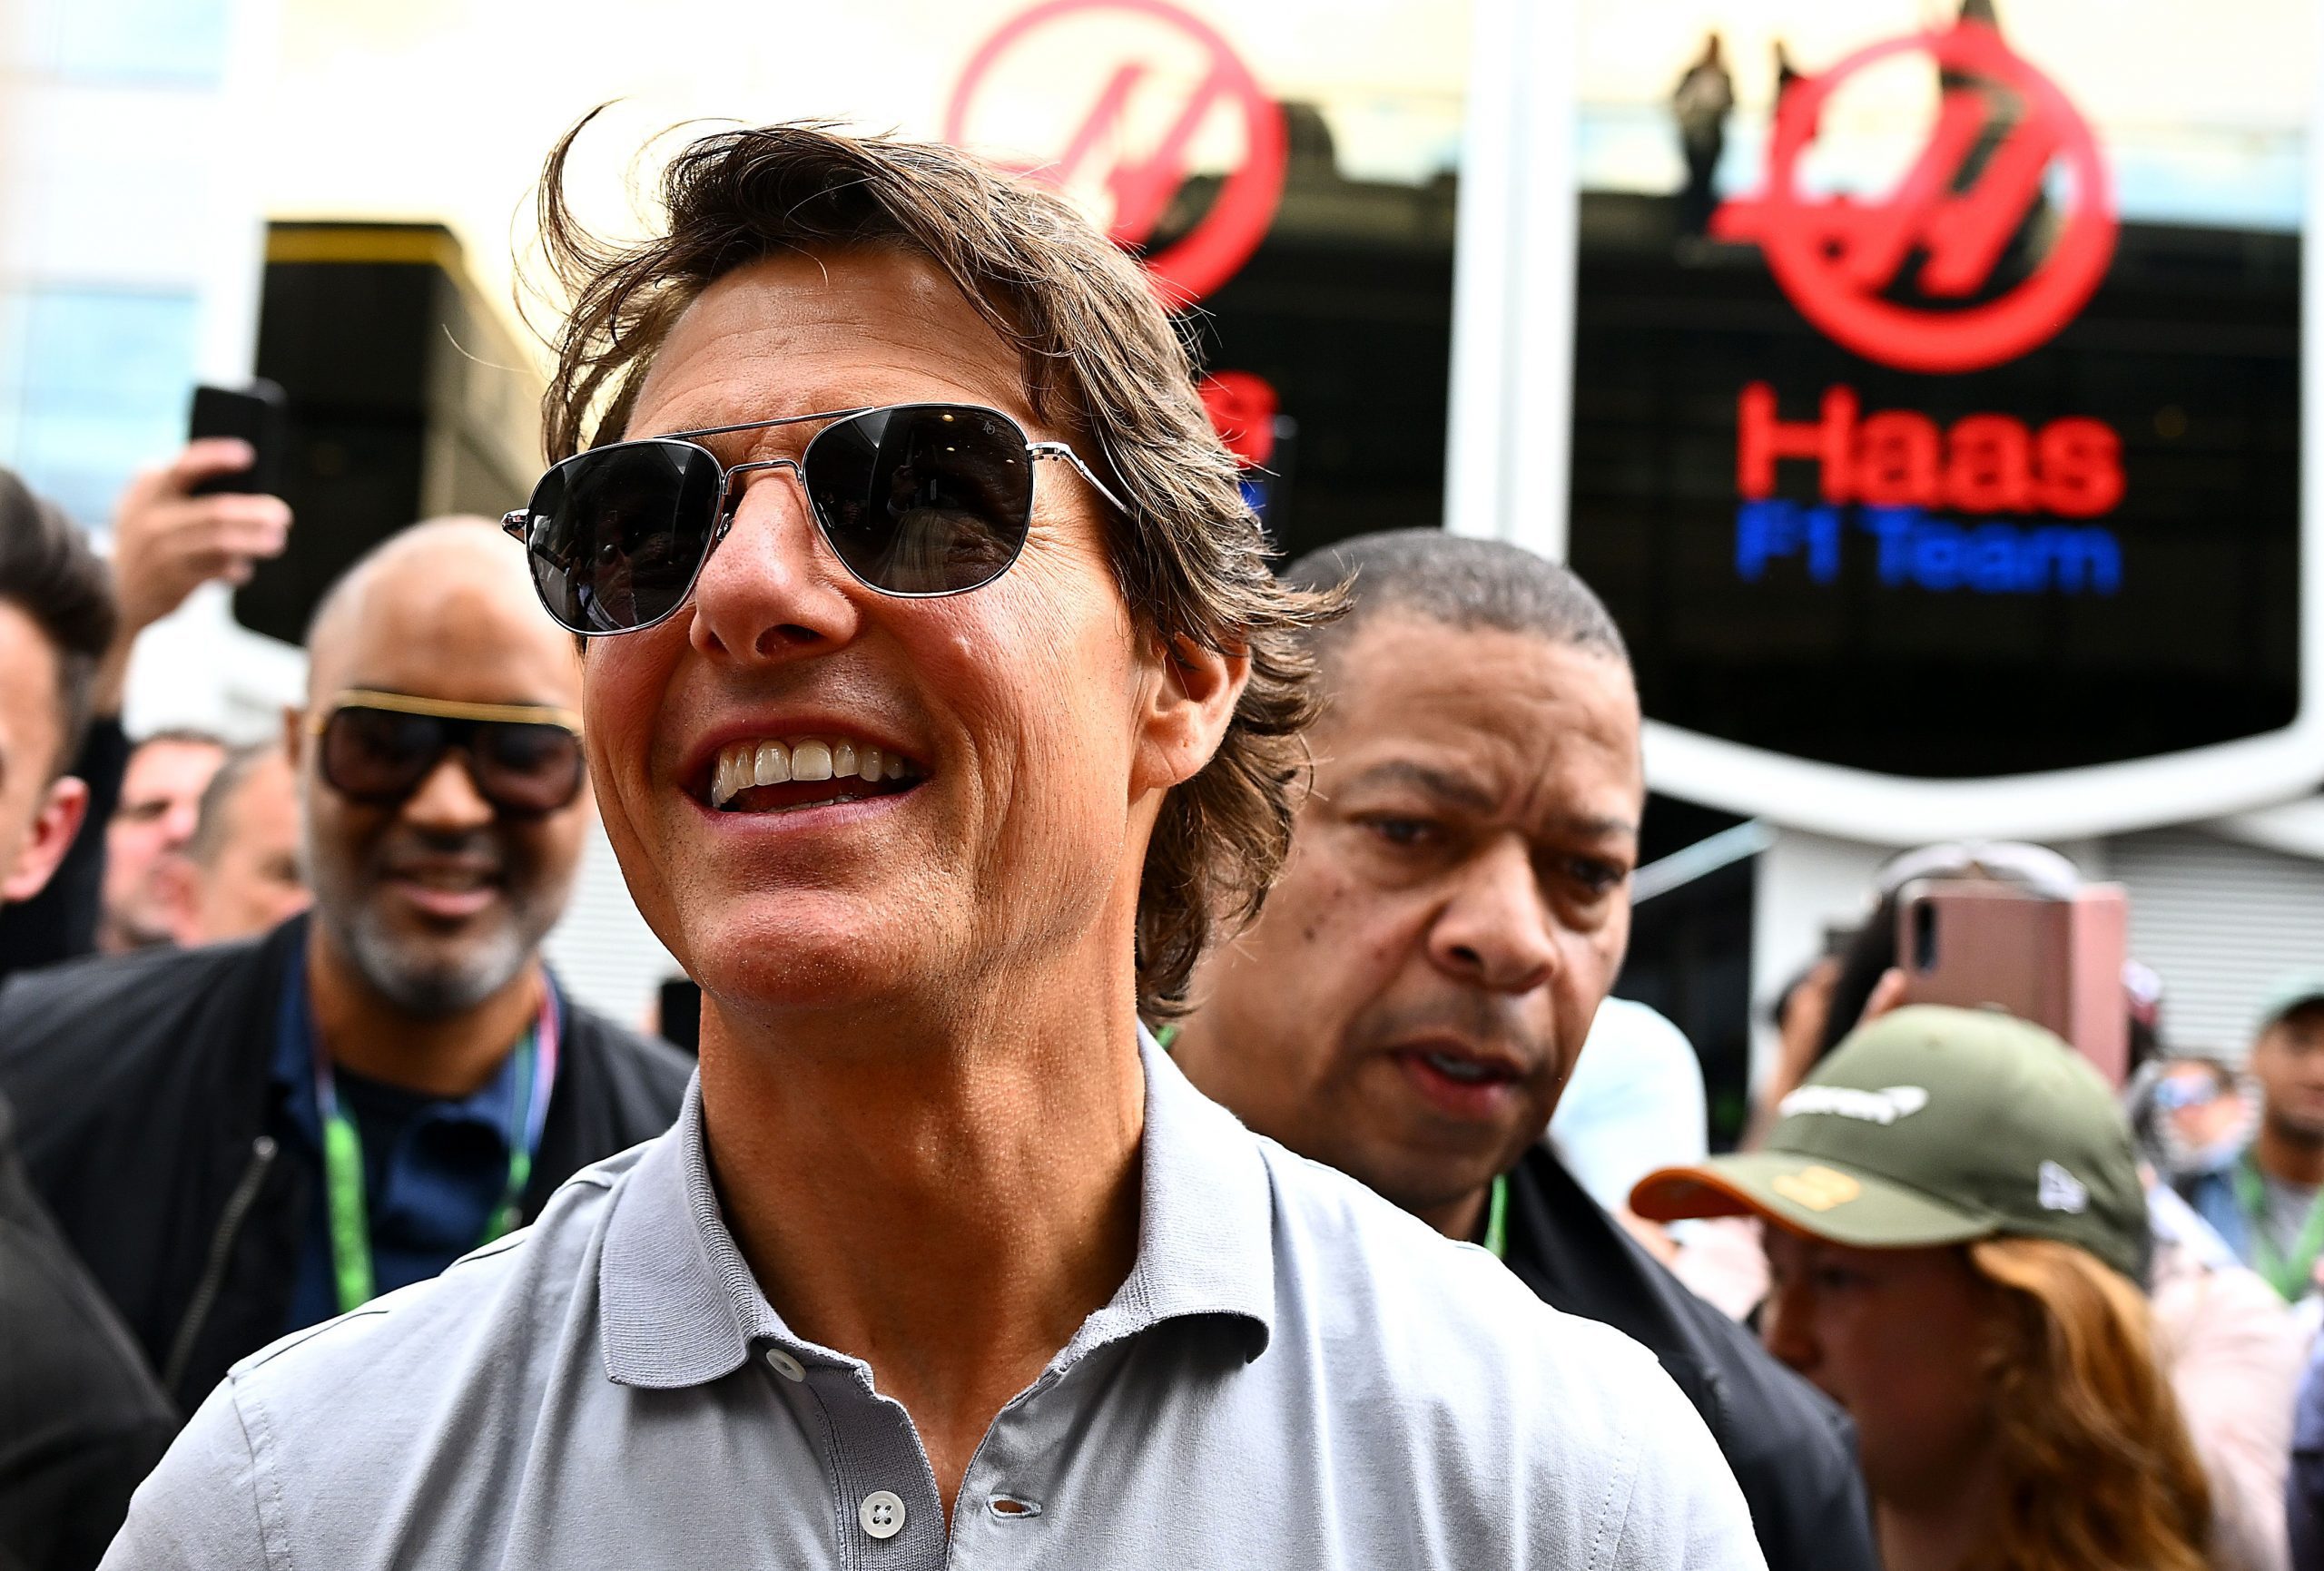 Tom Cruise quitting Mission Imspossible